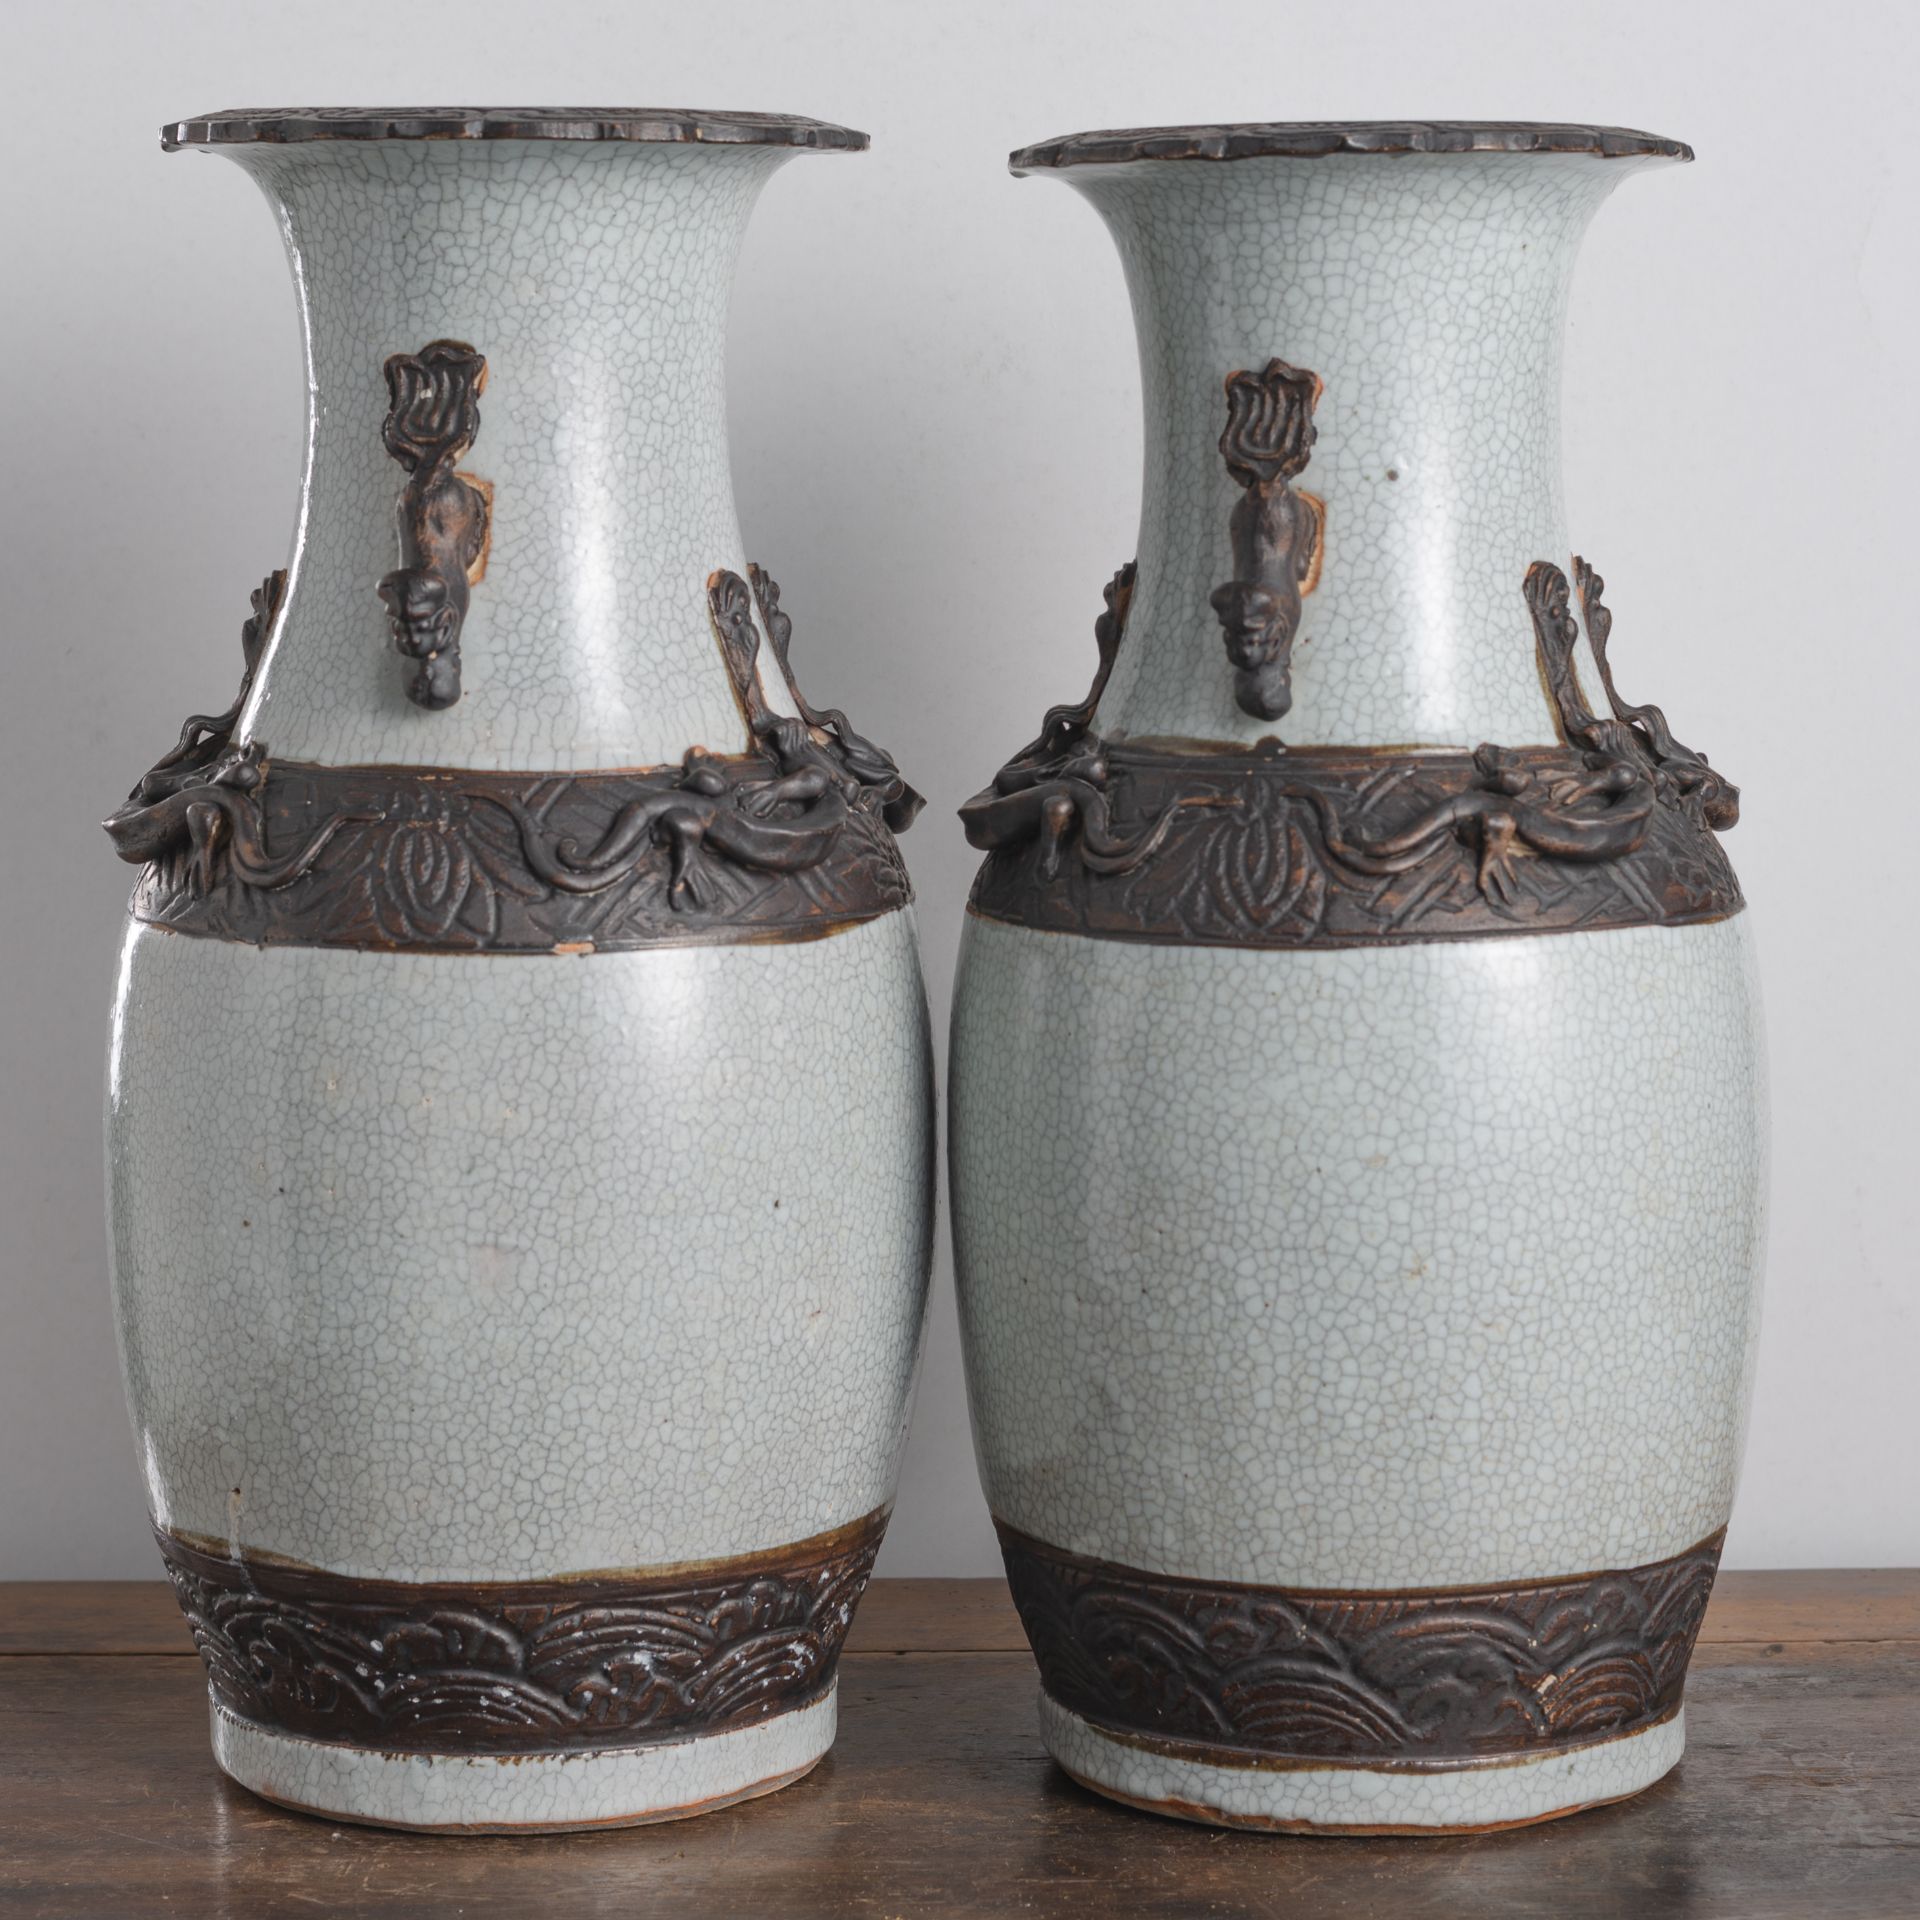 A PAIR OF RELIEF PORCELAIN VASES - Image 2 of 6